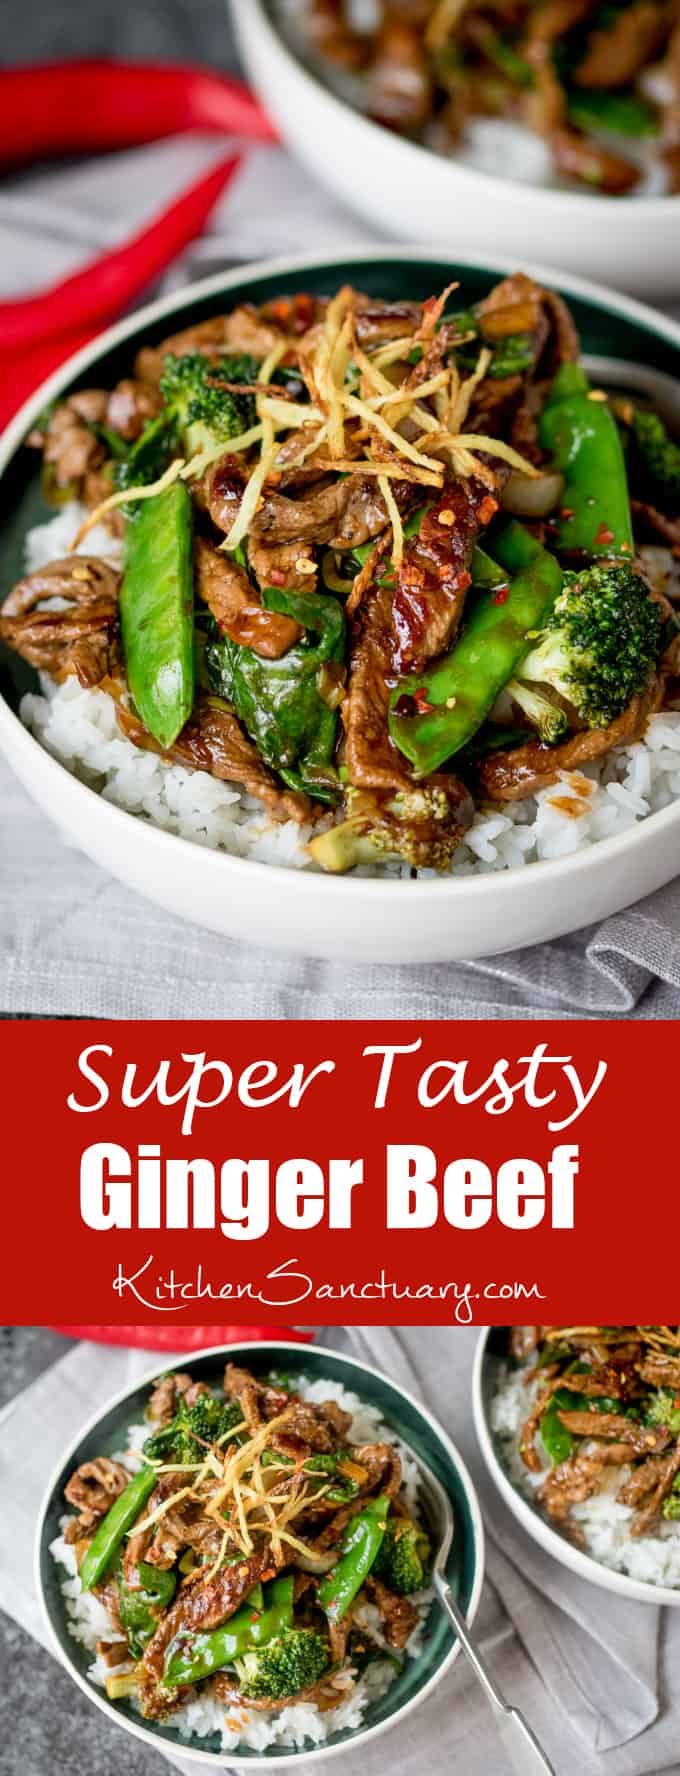 Spicy Ginger Beef Stir Fry - Nicky's Kitchen Sanctuary